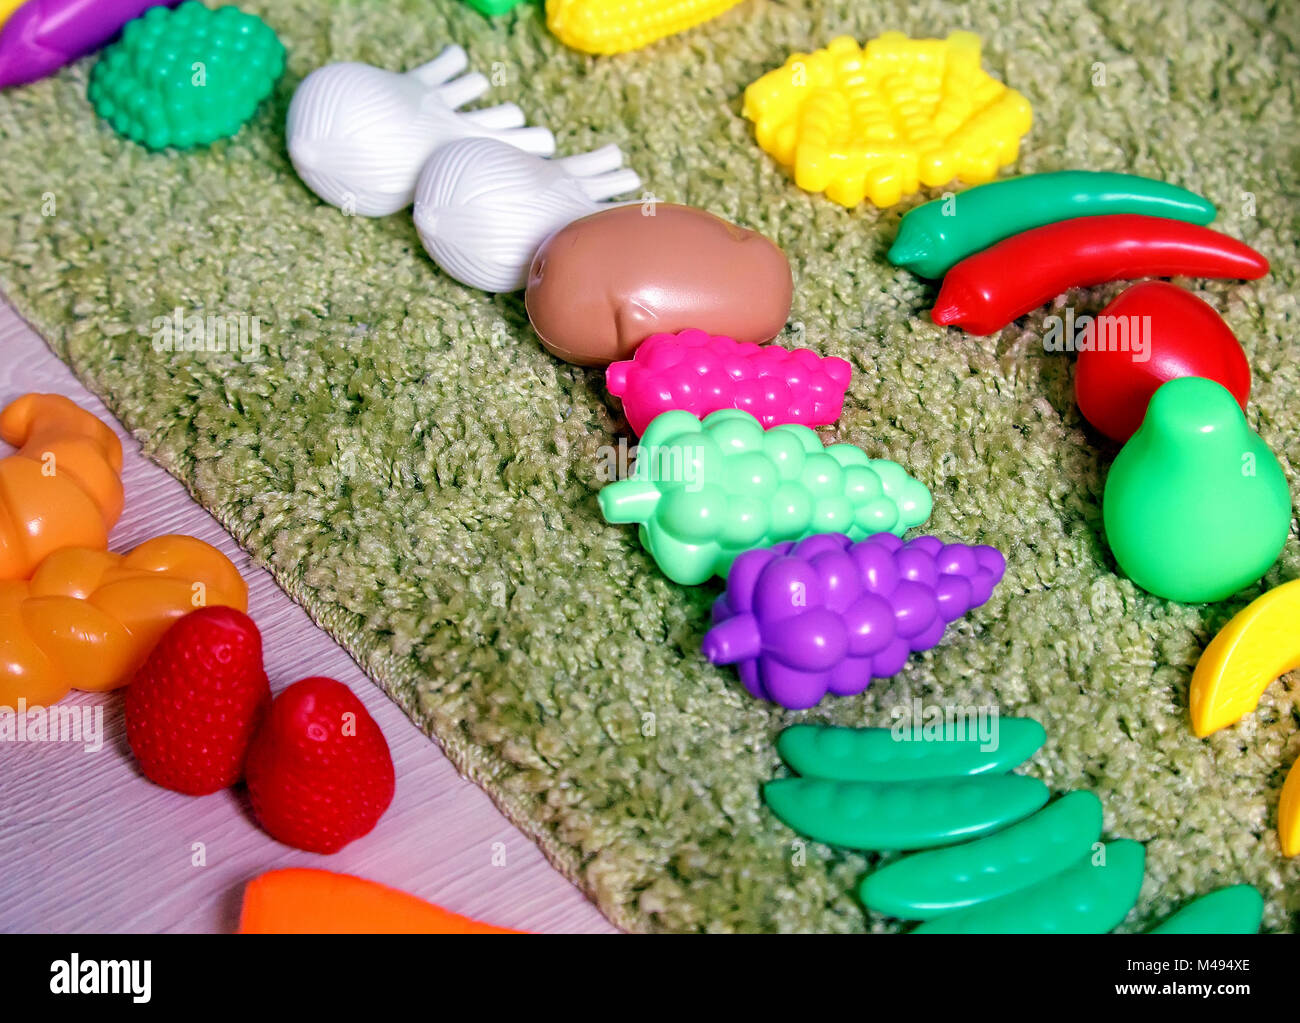 Plastic children's toys in the form of vegetables and fruits. Stock Photo